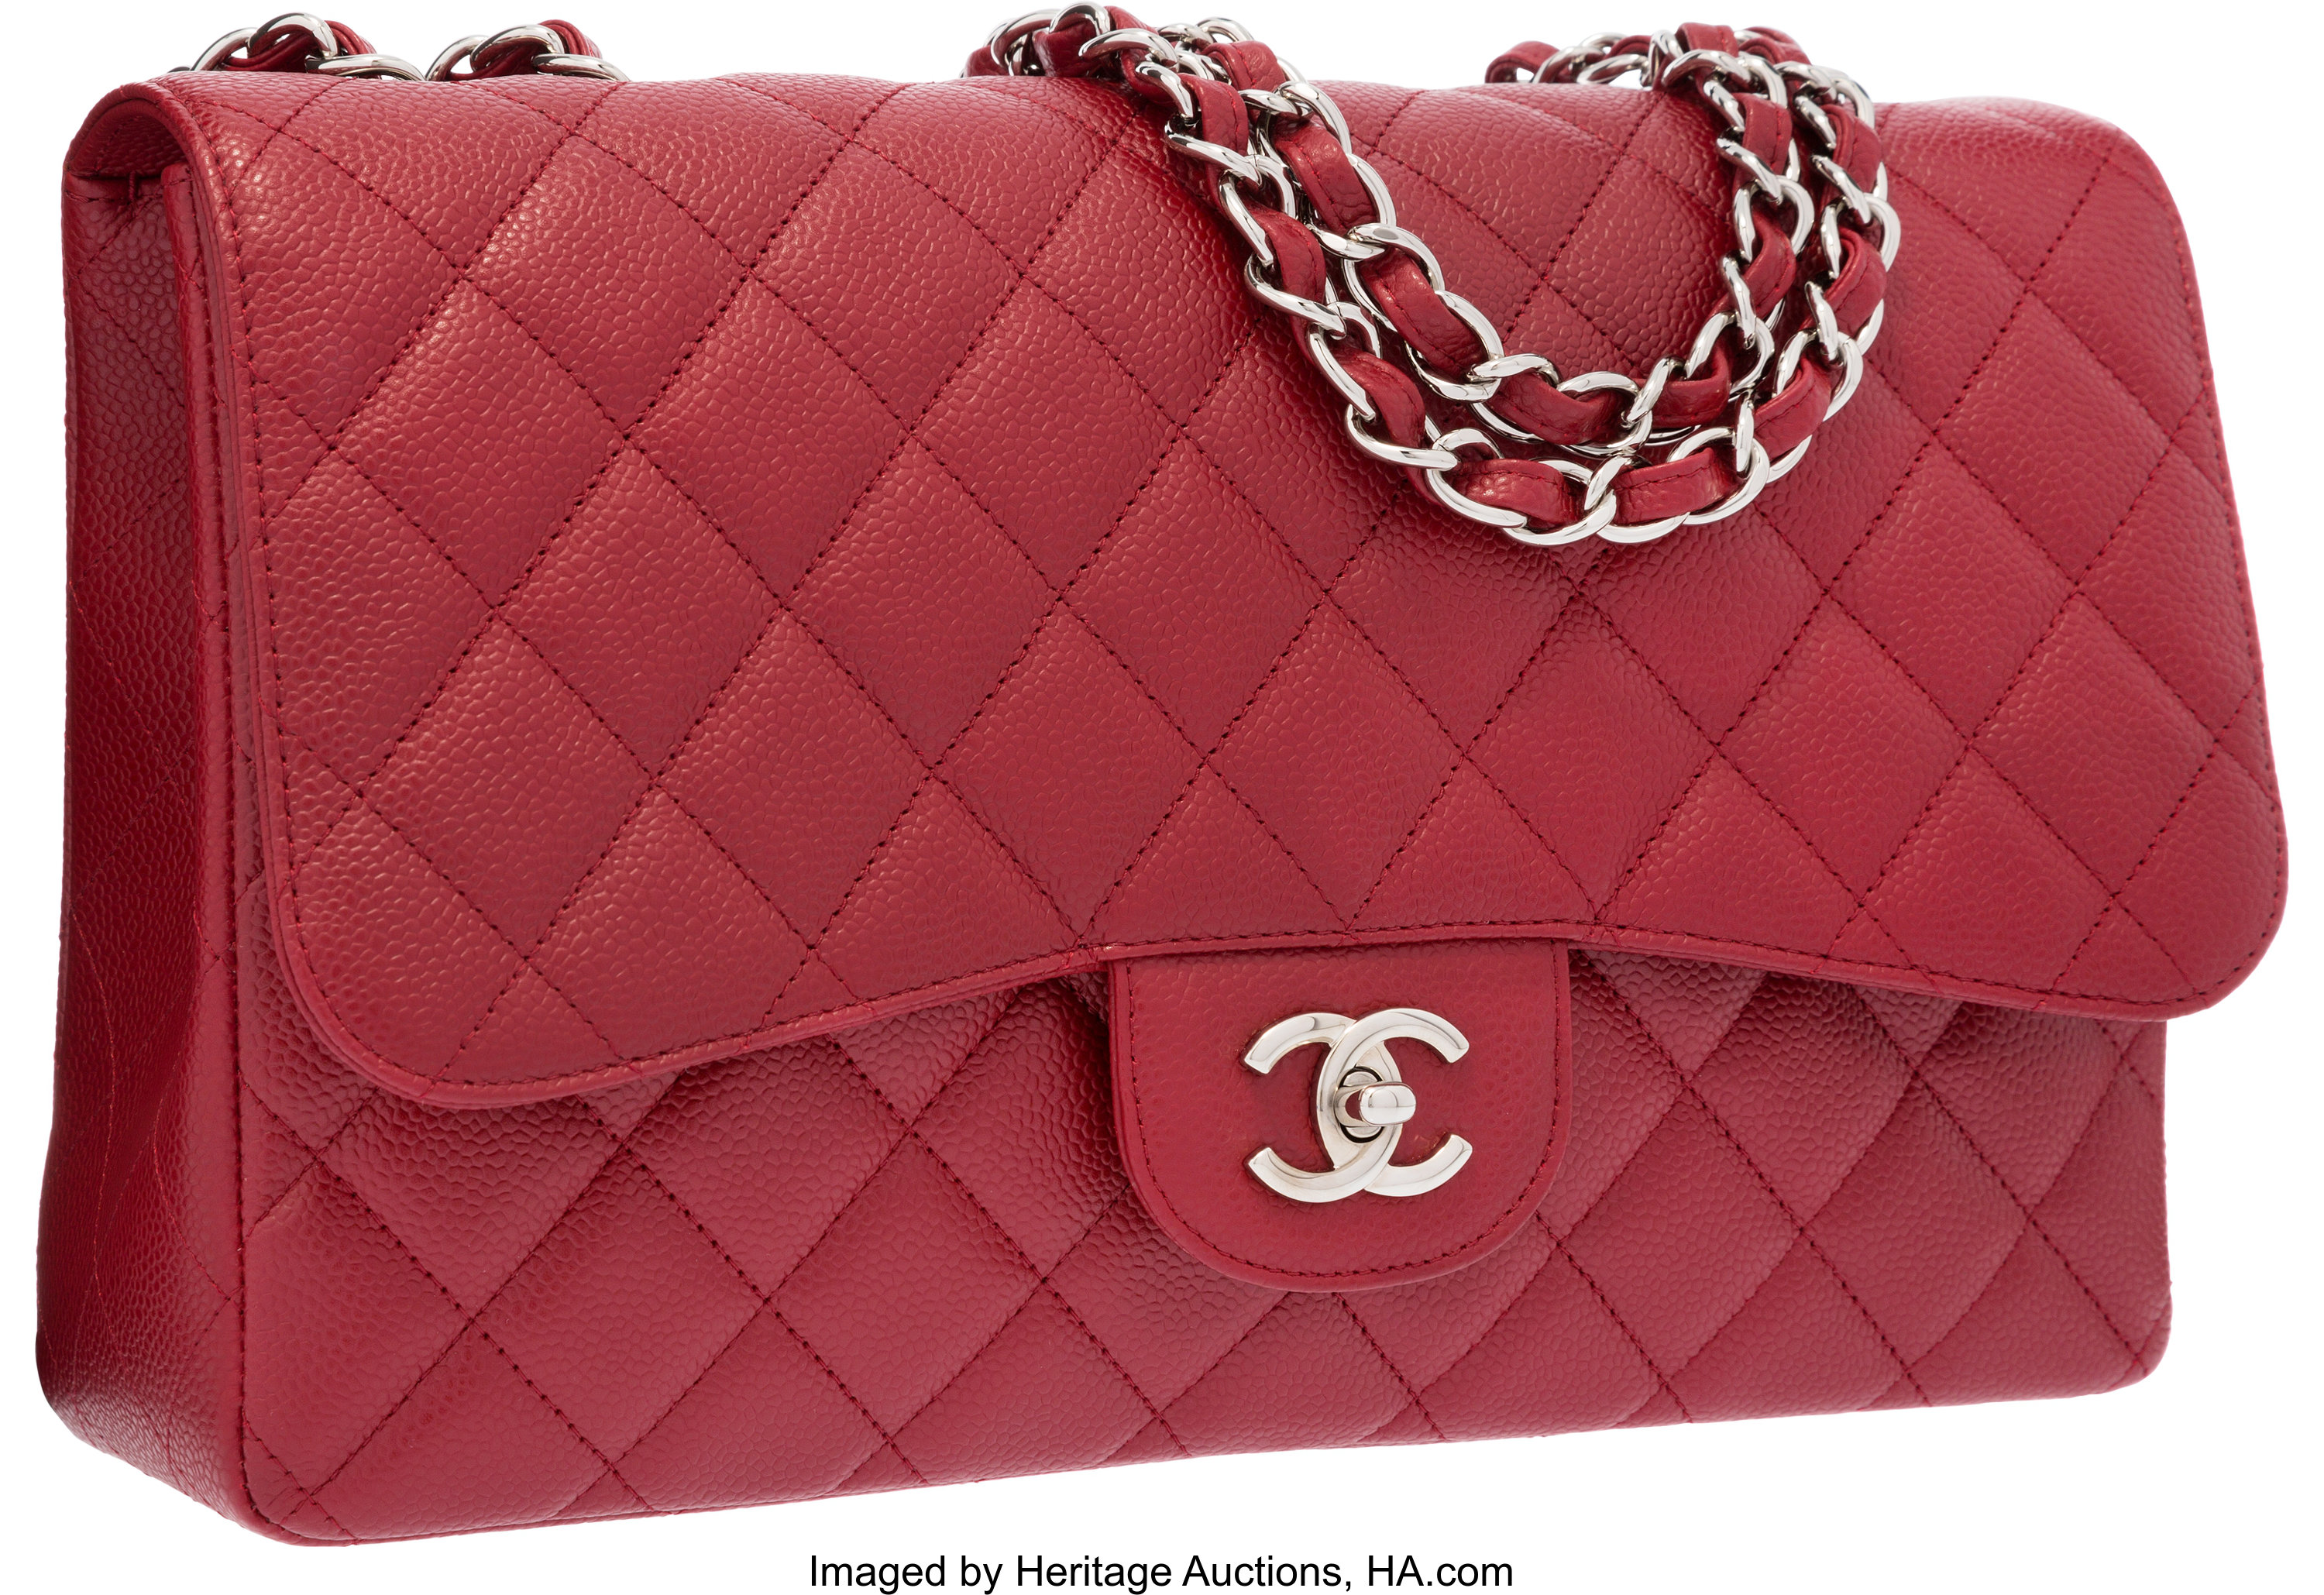 Chanel Red Quilted Caviar Leather Jumbo Single Flap Bag with